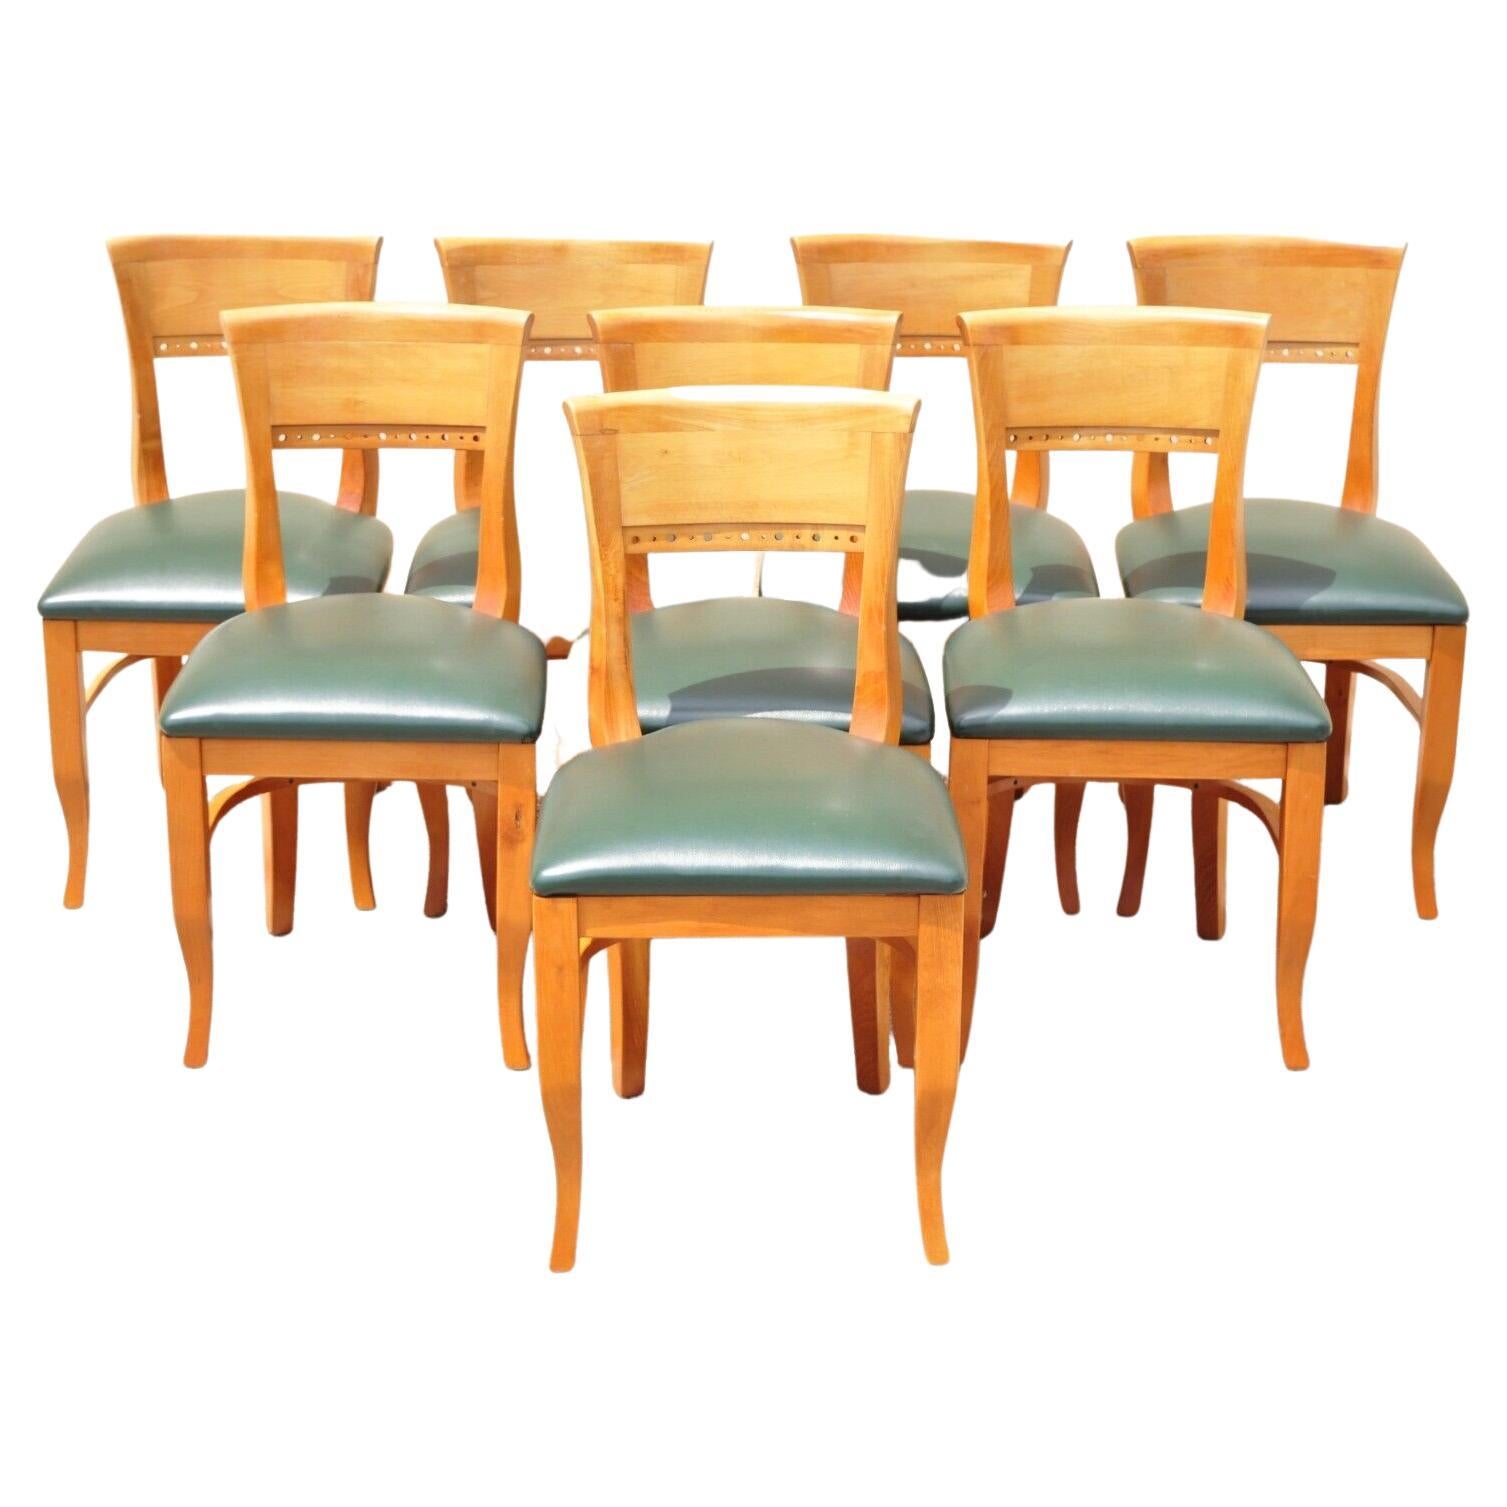 Art Deco Style Maple Wood Dining Chairs by Prince Seating, Set of 8 For Sale